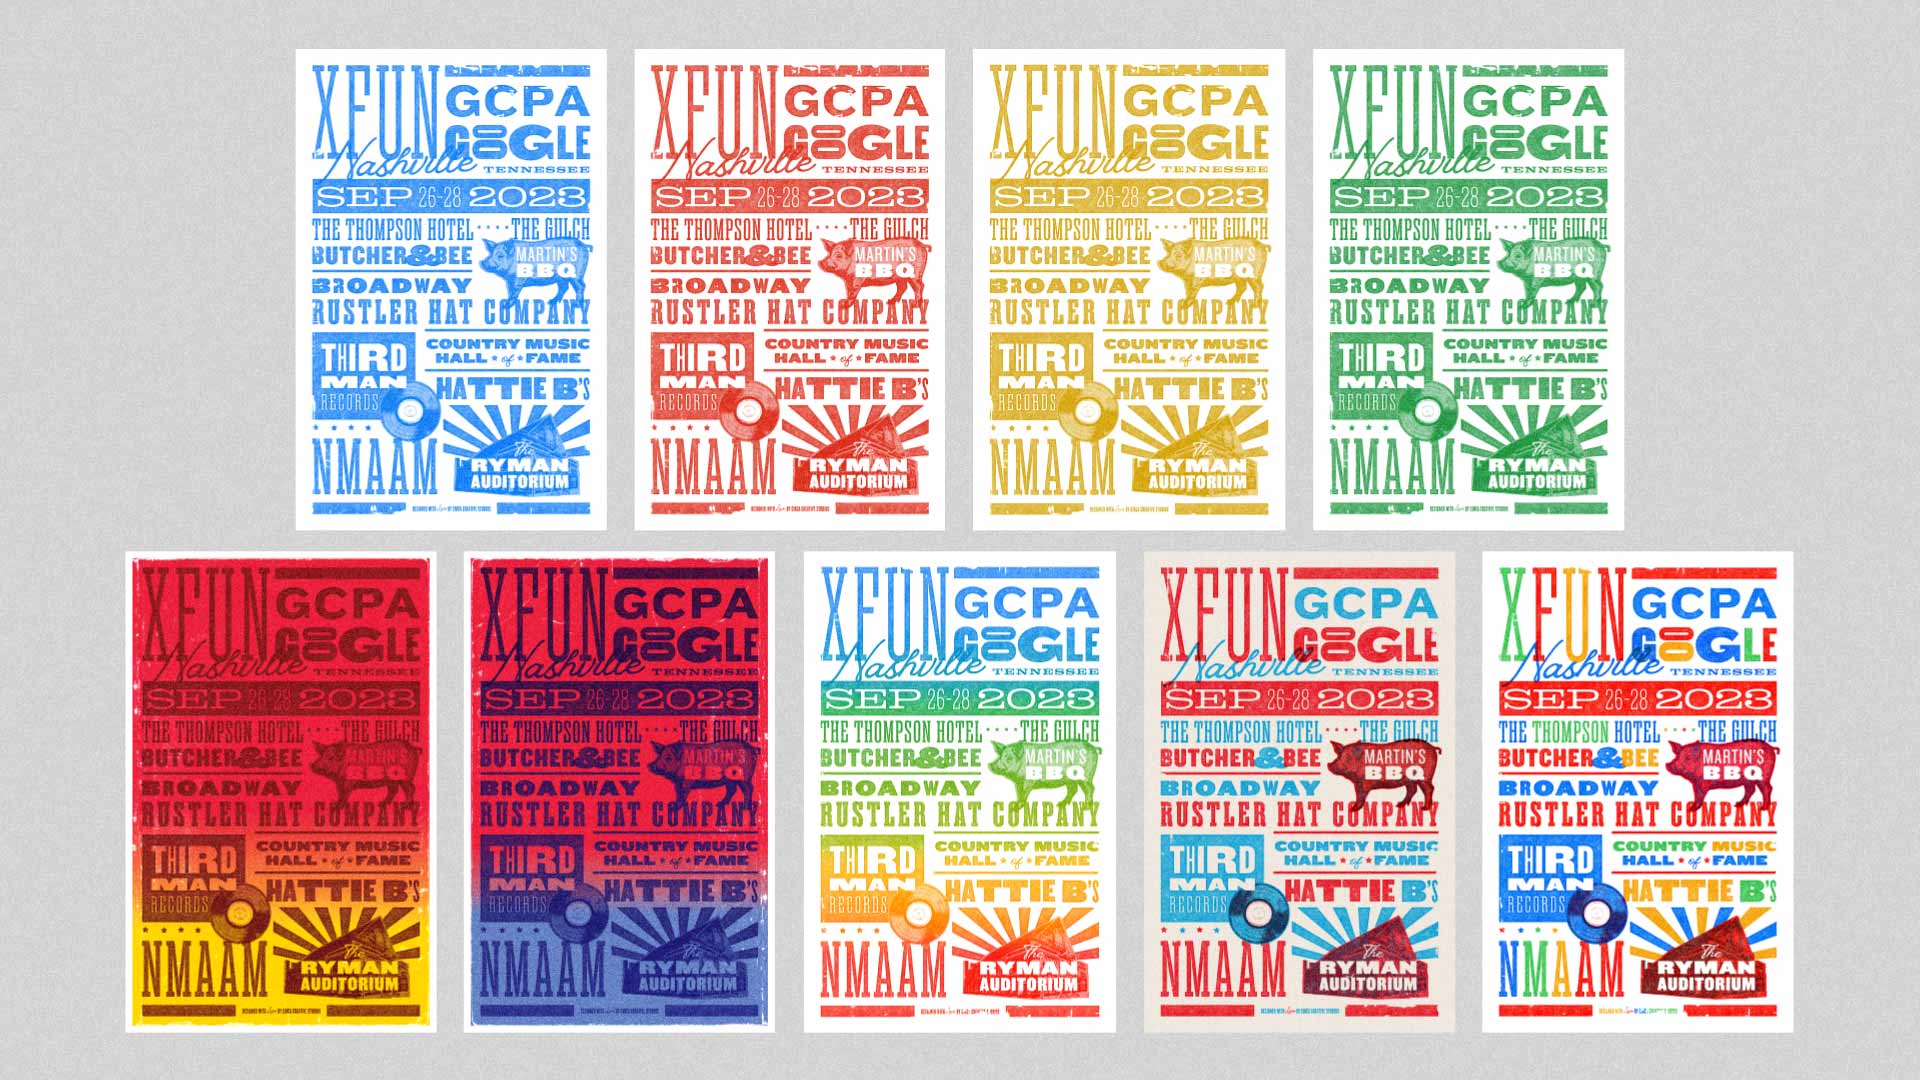 Various color versions of the poster